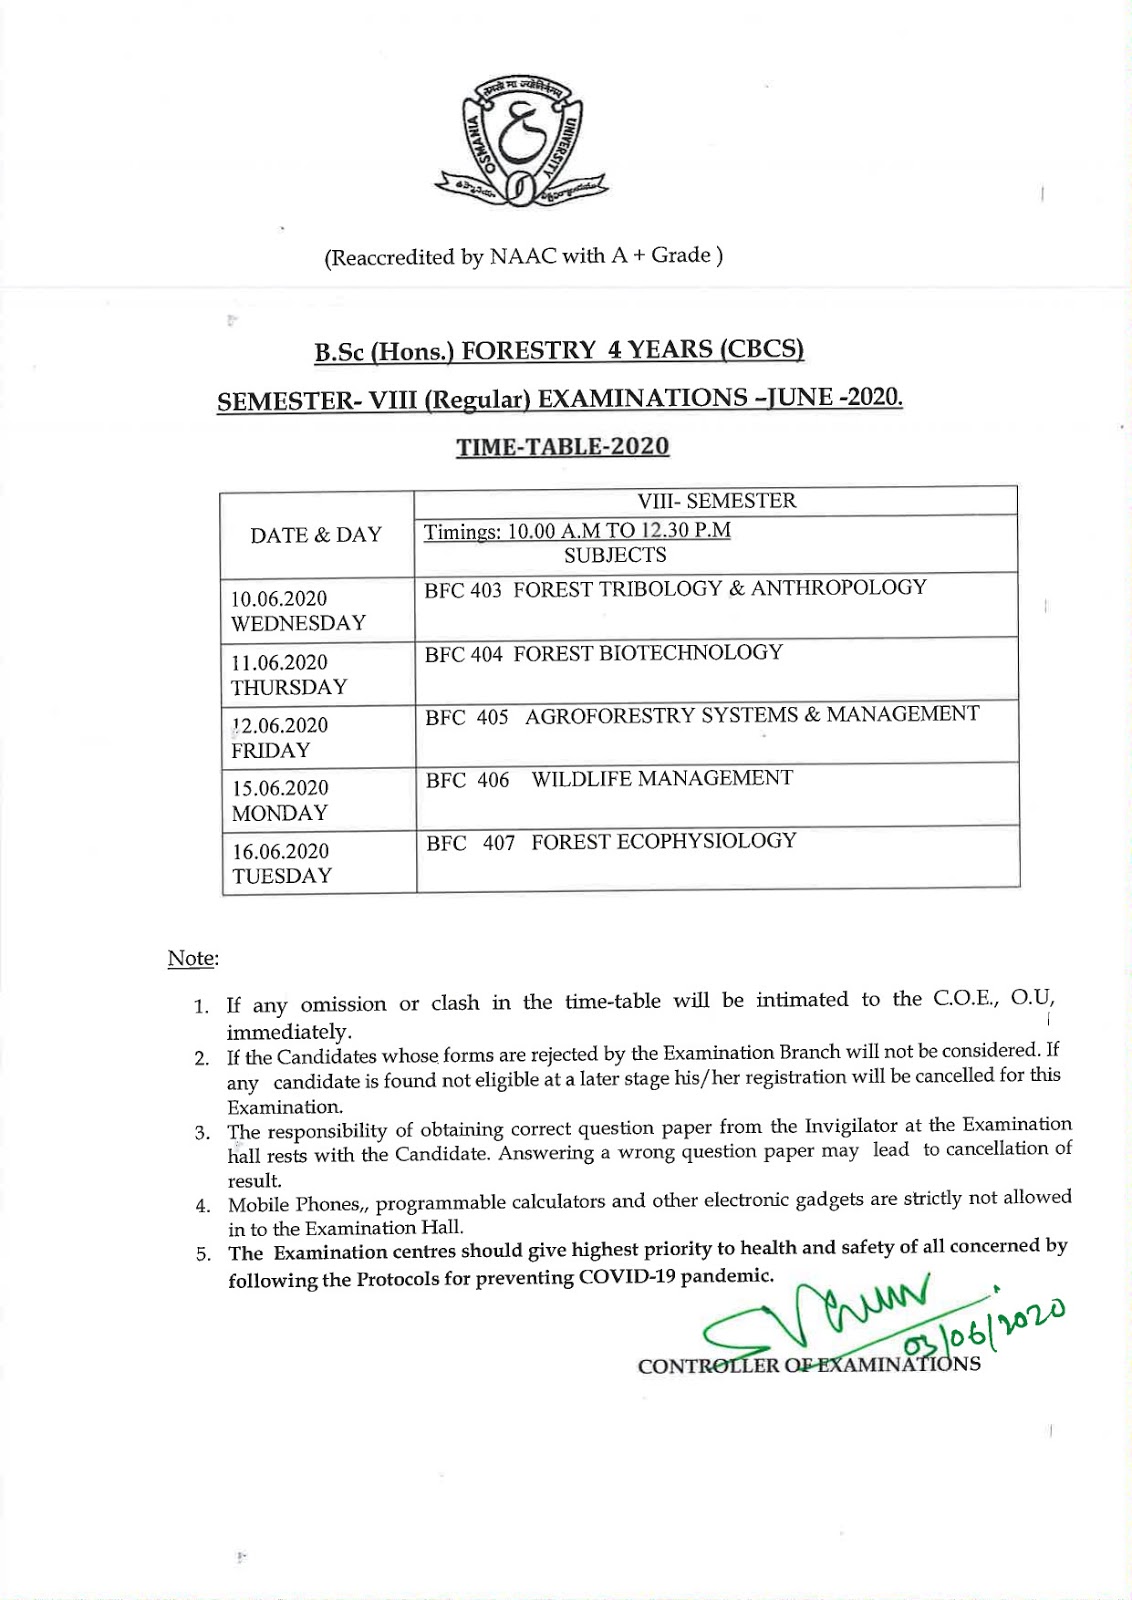 osmania university bsc hons forestry 4 years 8th sem reg cbcs june 2020 exam time table